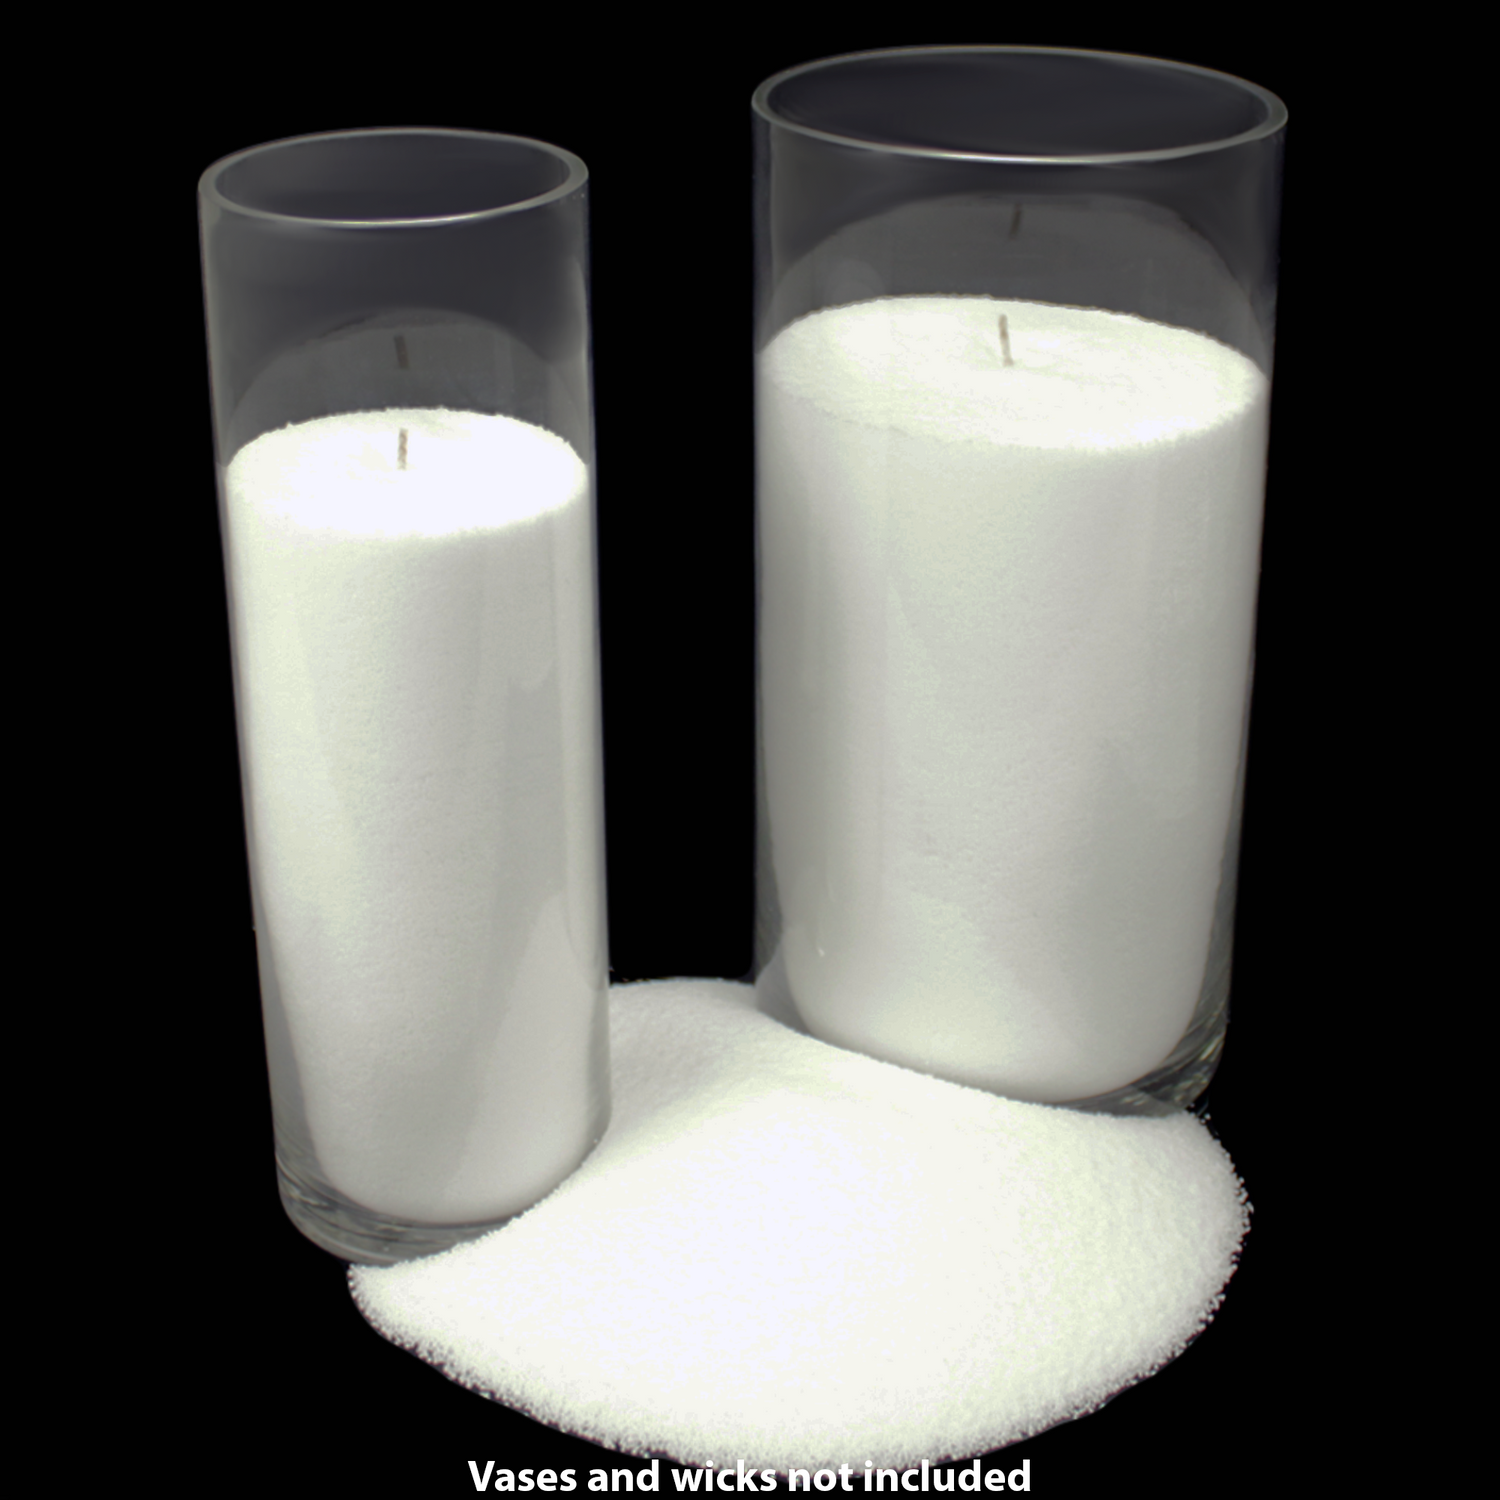 True Candle, 24 x 8oz Candle Tins, Rimless Cylinder Design